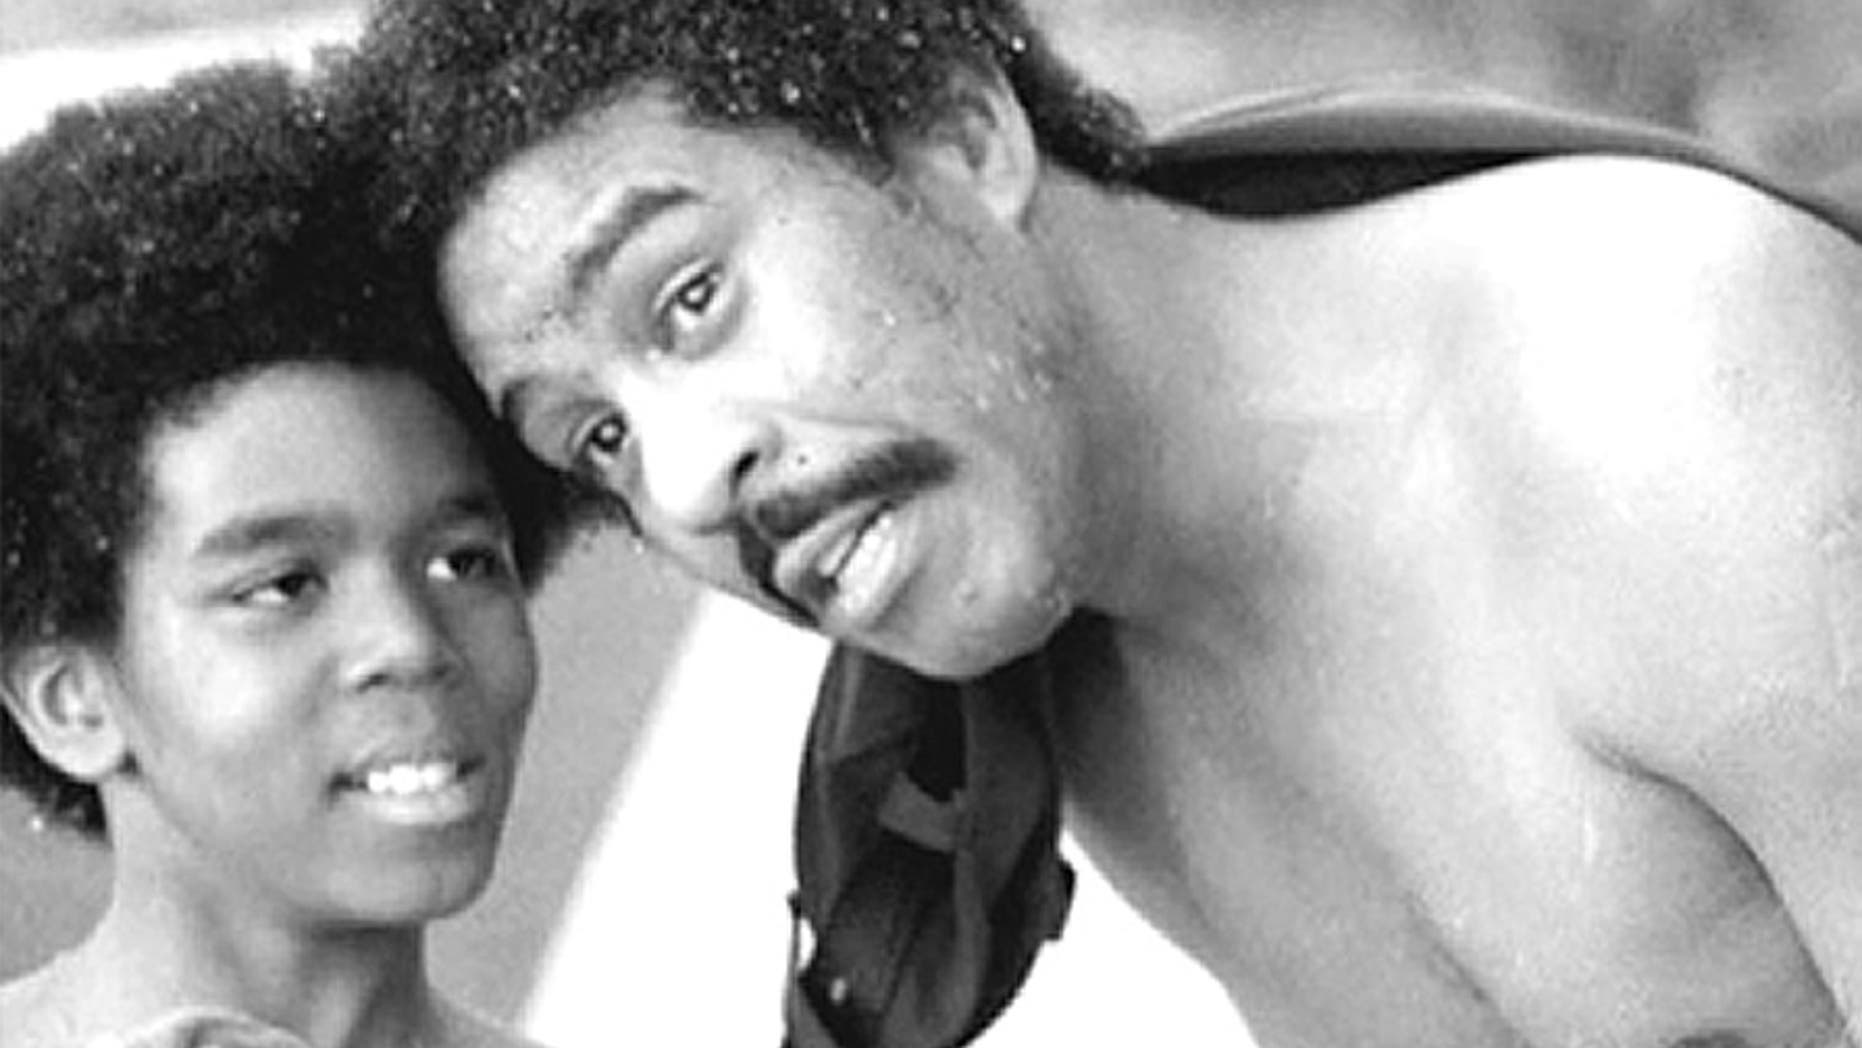 Richard Pryor Jr. recalls growing up with his famous father, overcoming